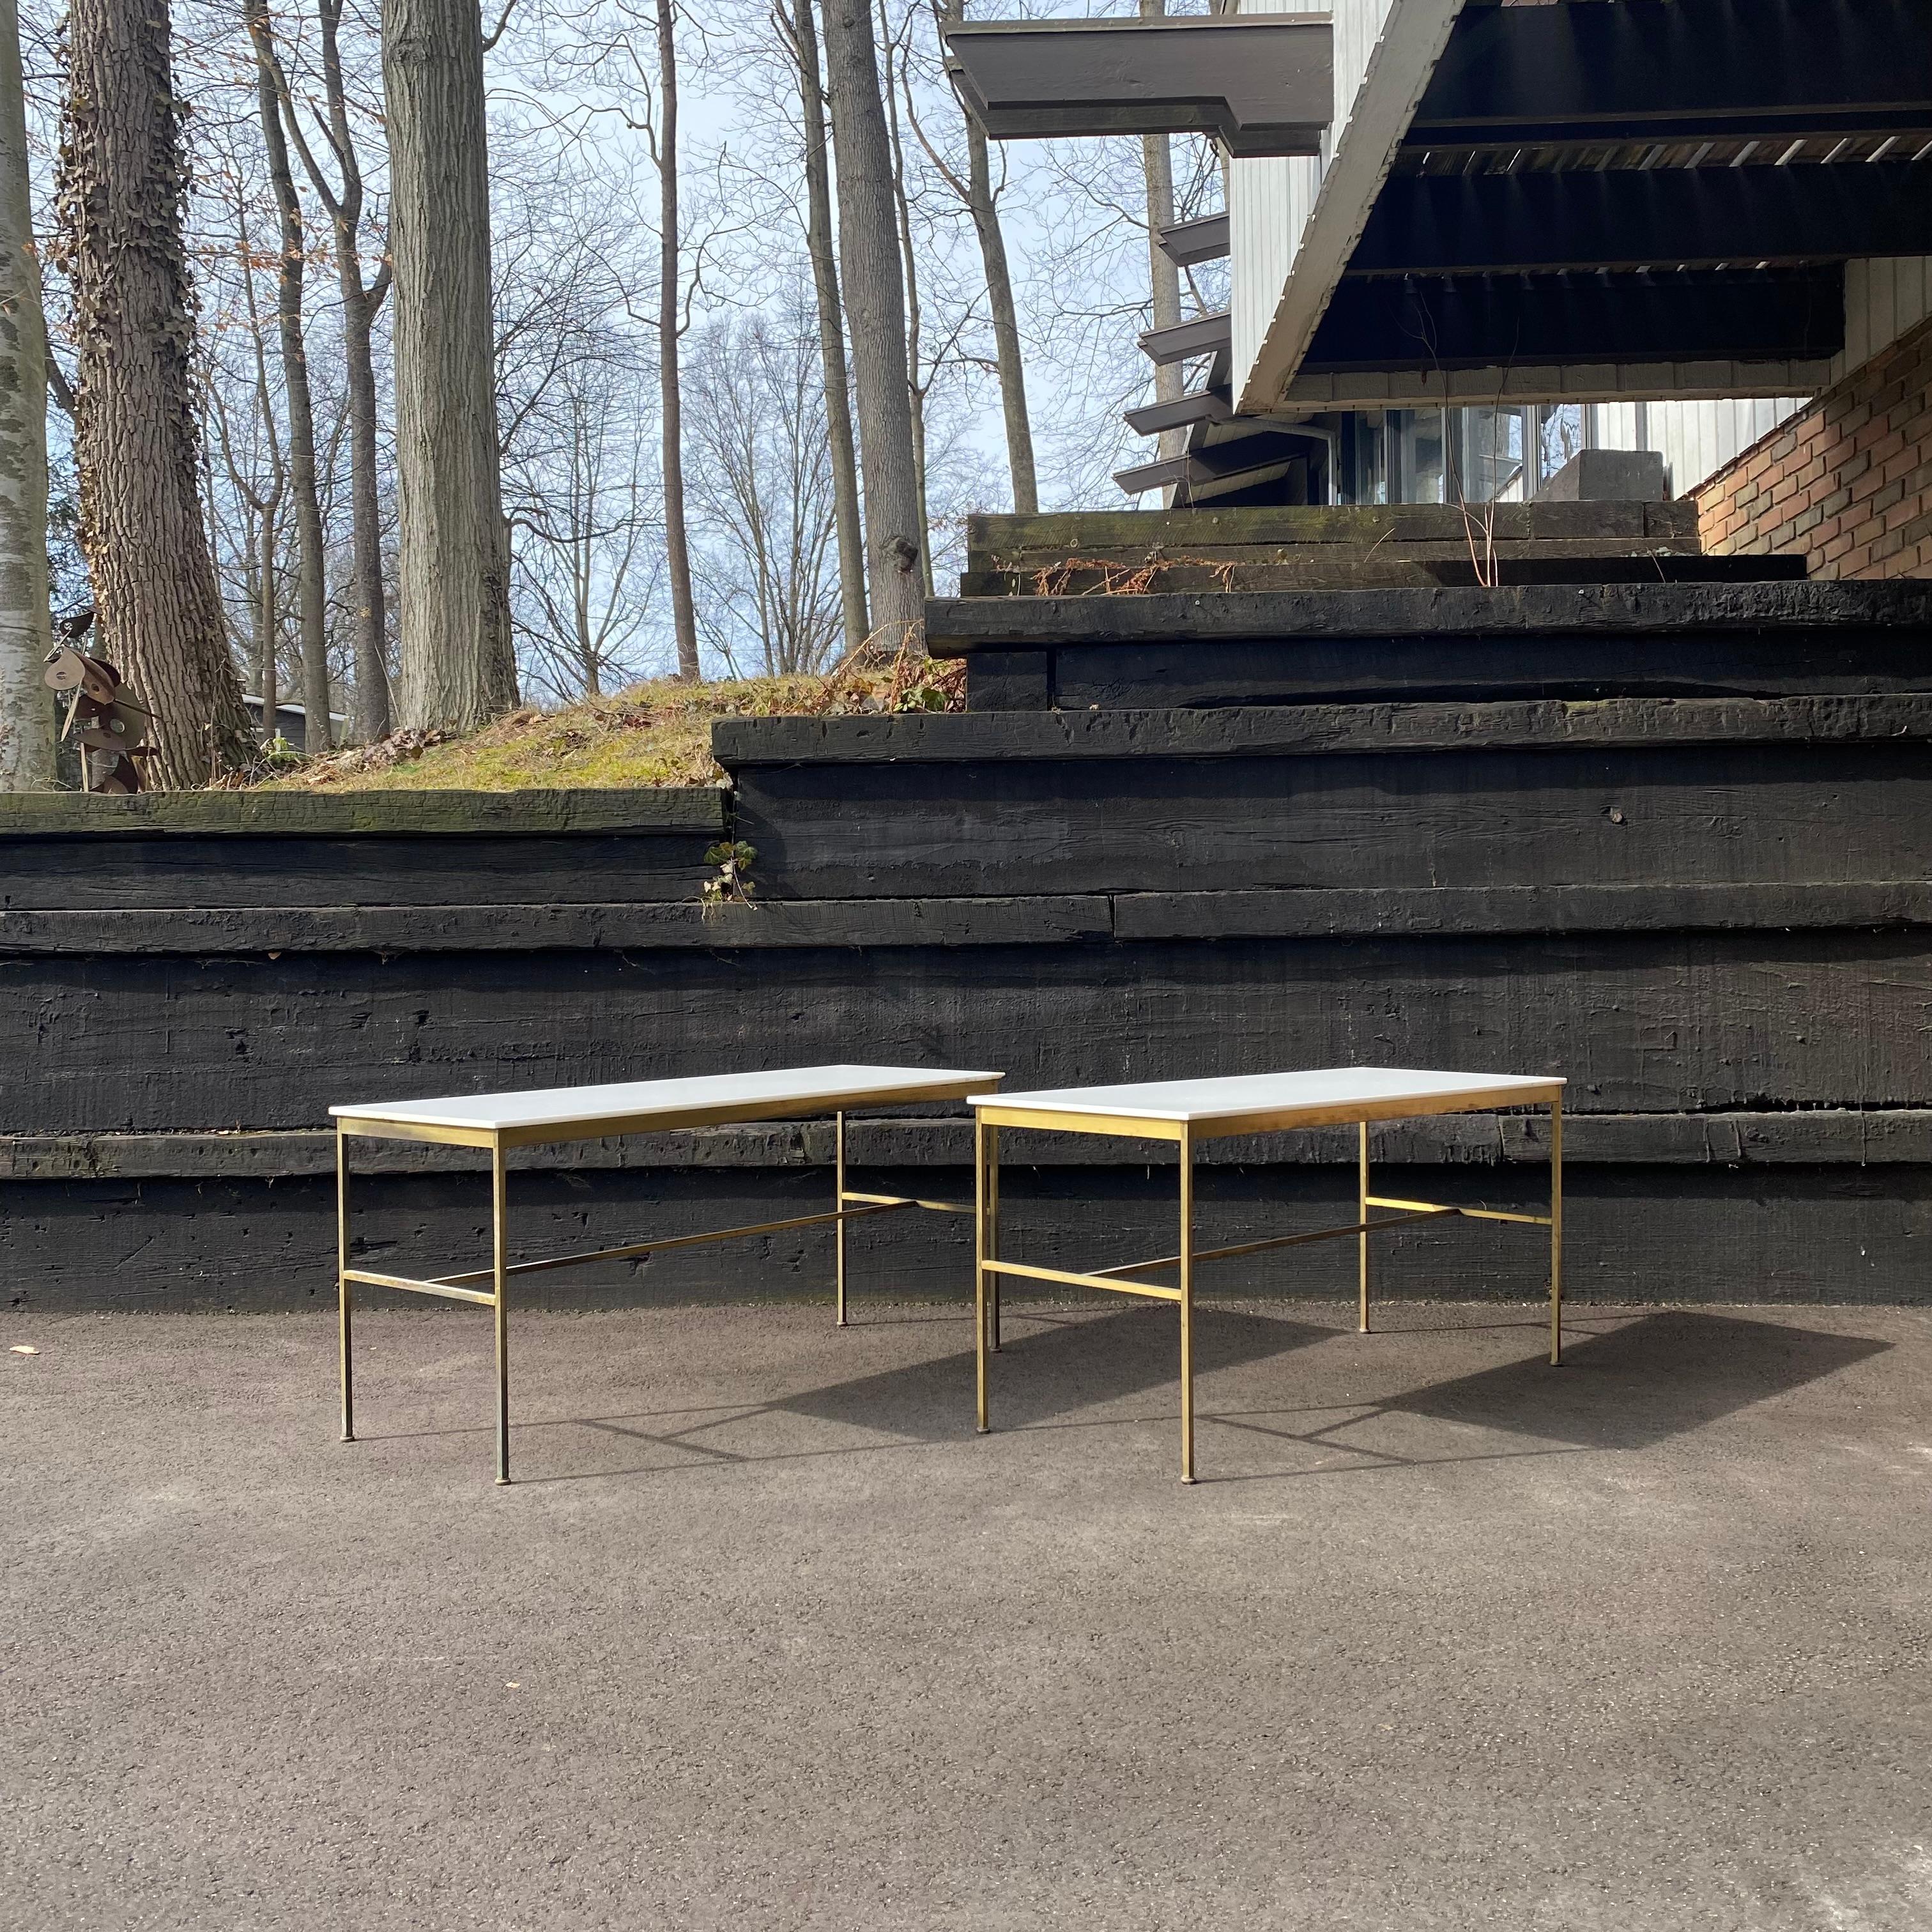 This is an absolutely gorgeous pair of all-original brass and white Carrara glass console table designed by Paul McCobb for Directional Furniture, ca. 1950's. It would make a perfect television stand or could even work for behind the sofa depending